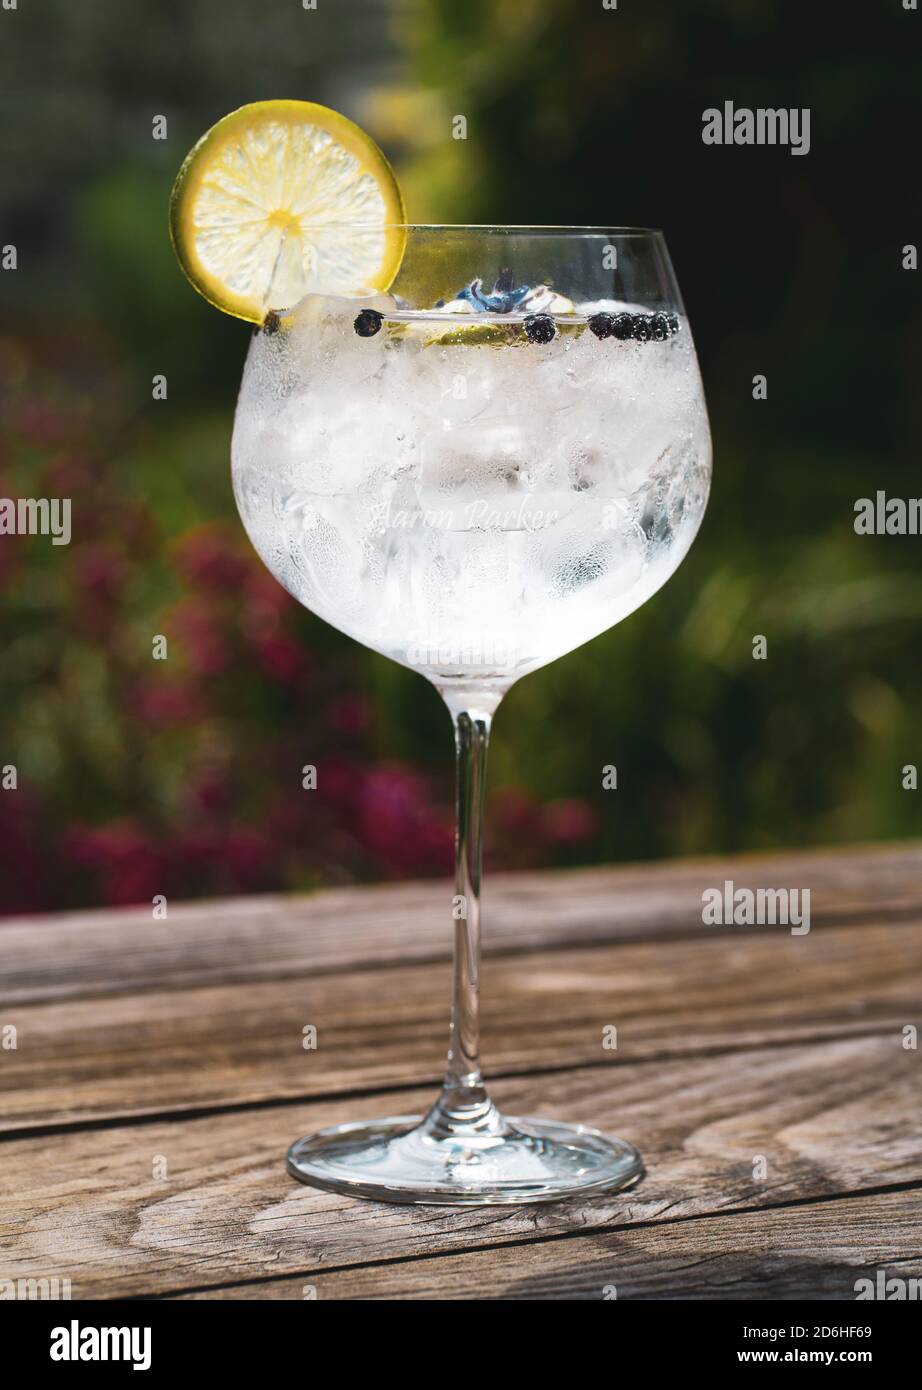 Gin and tonic cocktail drink outside on a wooden table with ice, lemon and lime Stock Photo